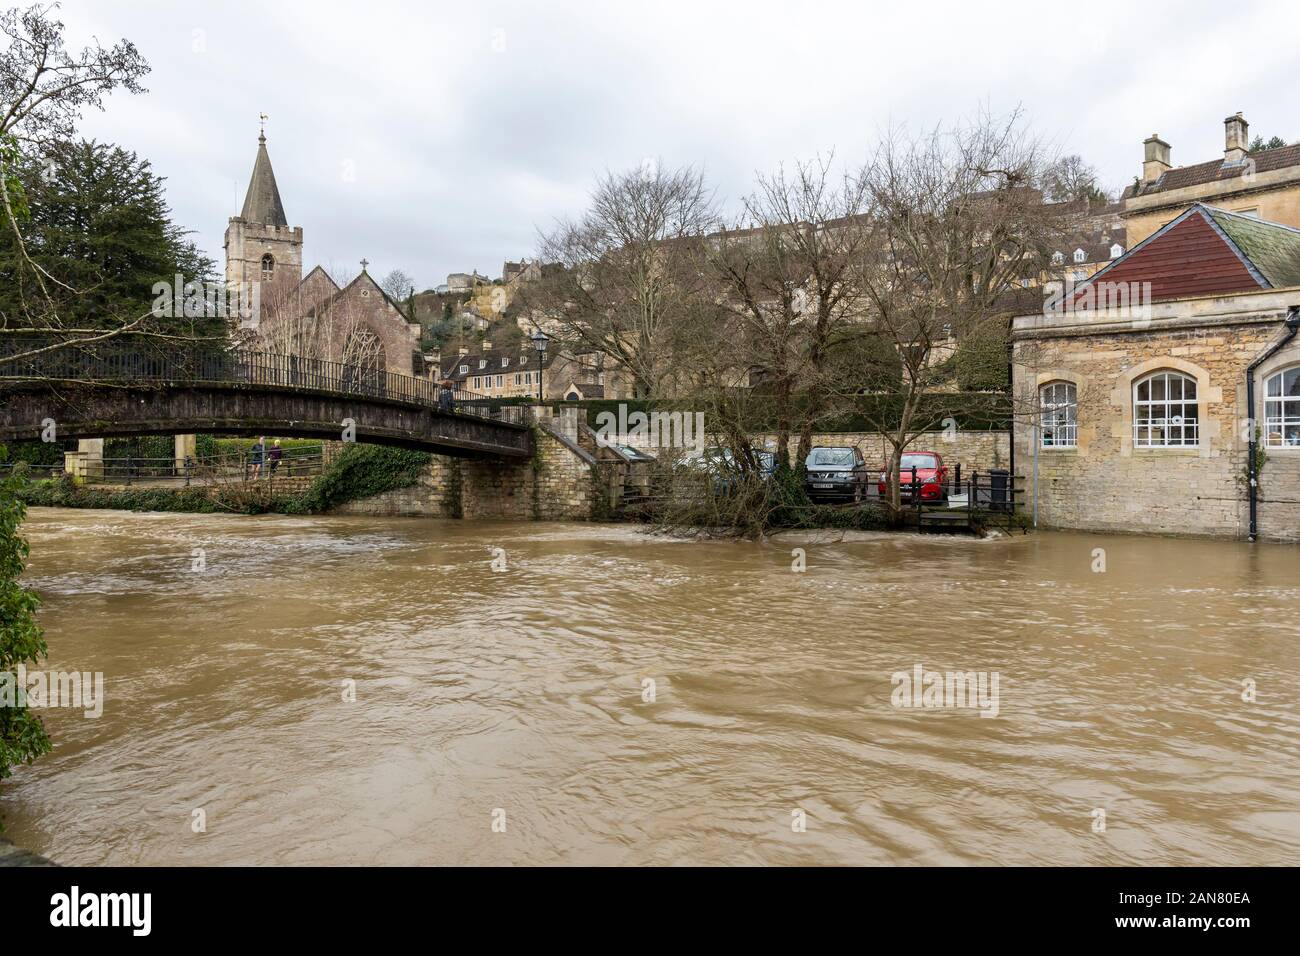 The swollen River Avon in Bradford on Avon, Wiltshire, UK on the 16th January 2020, England, UK Stock Photo